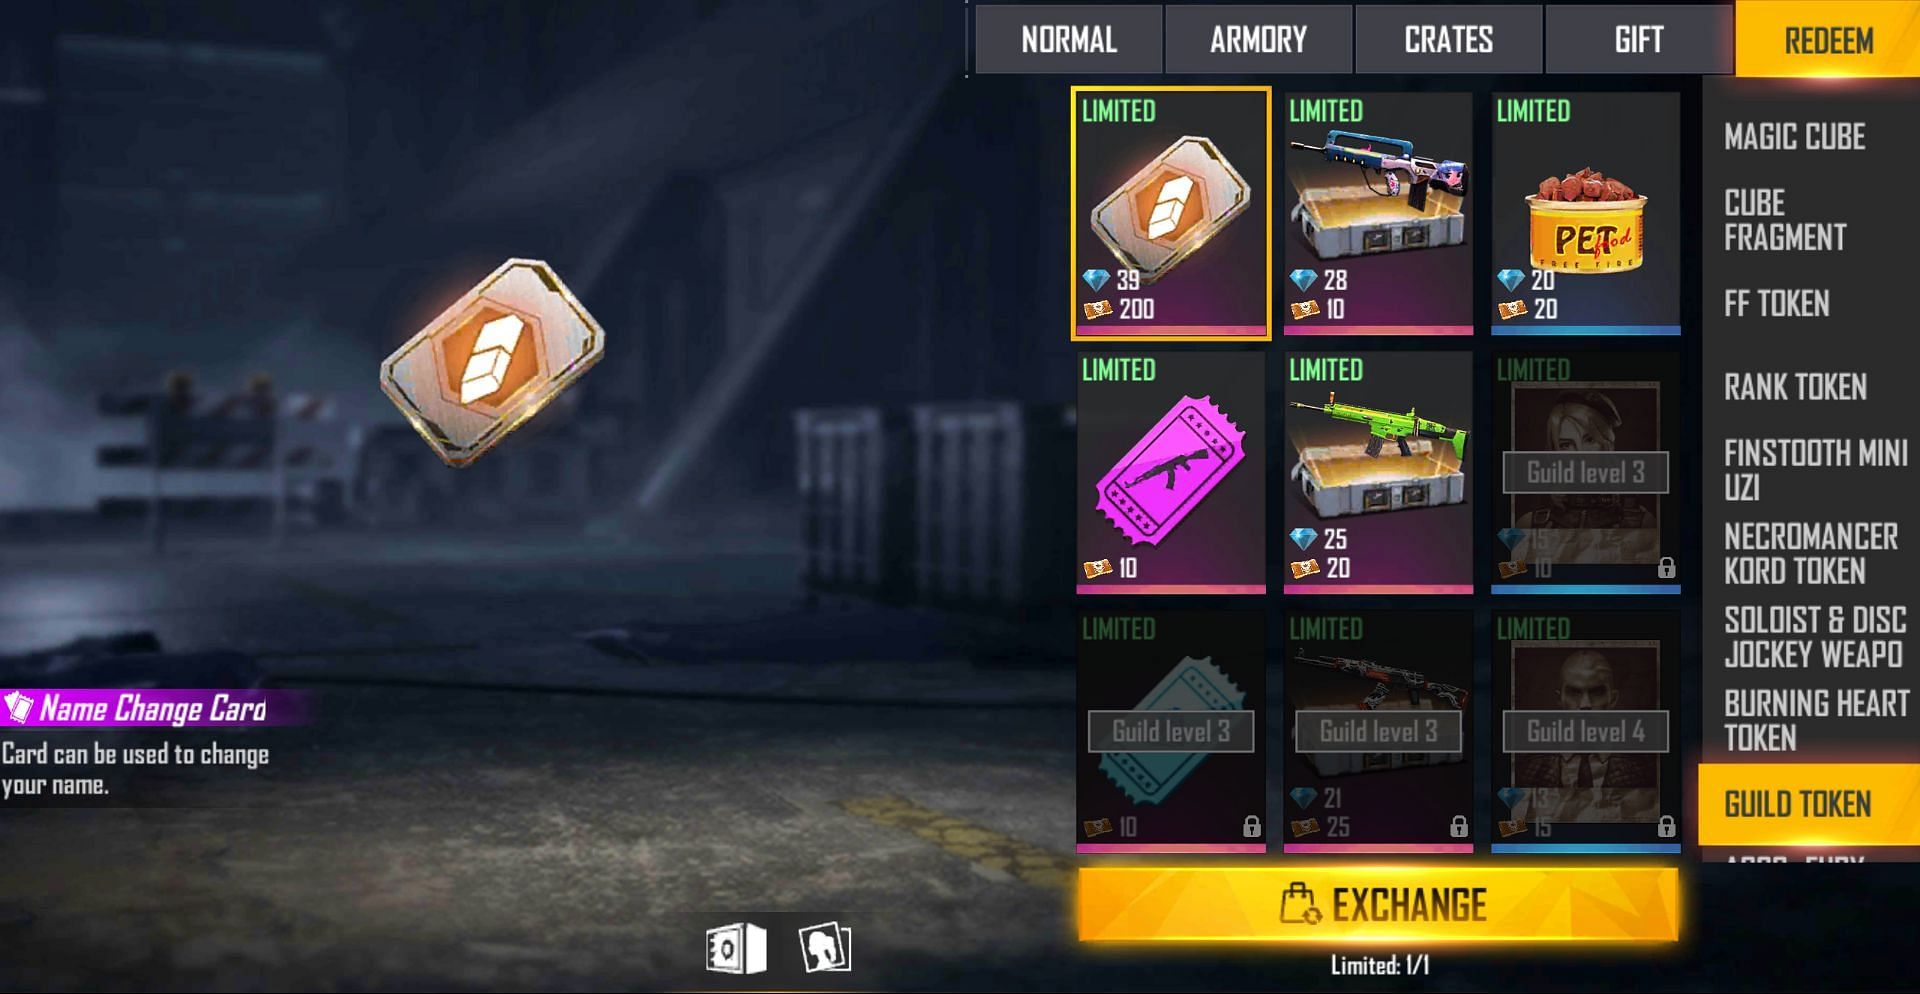 The name change card can be redeemed for diamonds and guild tokens (Image via Free Fire)